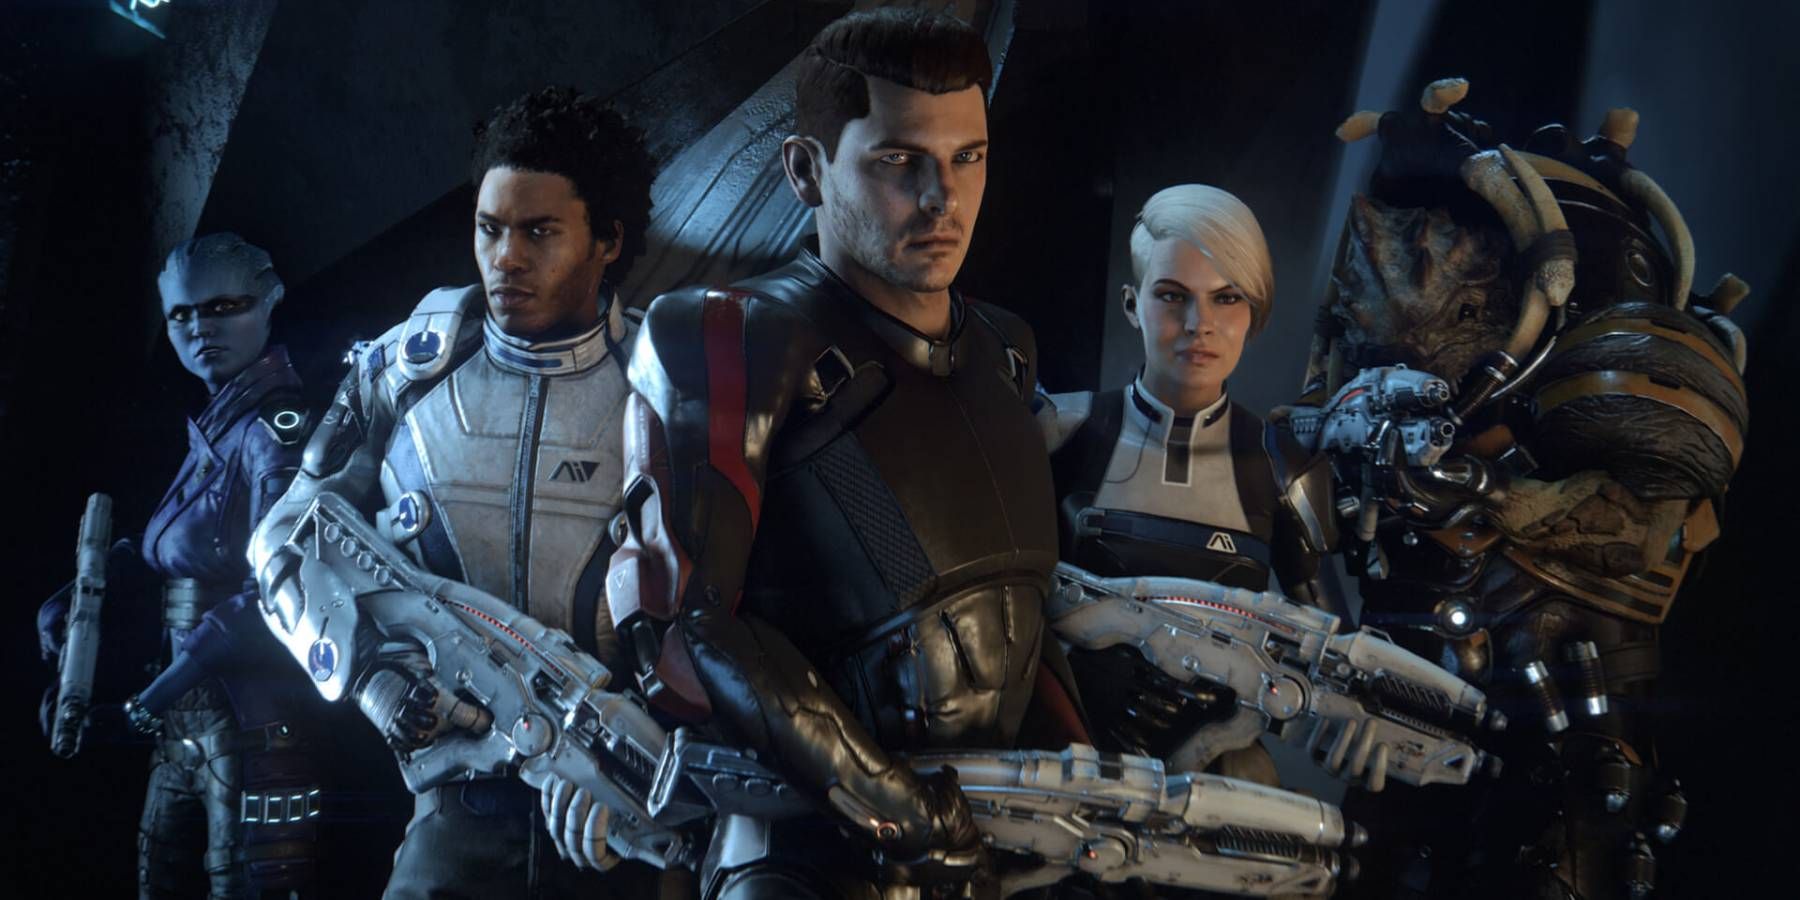 Peebee, Liam, Ryder, Cora, and Drack from Mass Effect: Andromeda